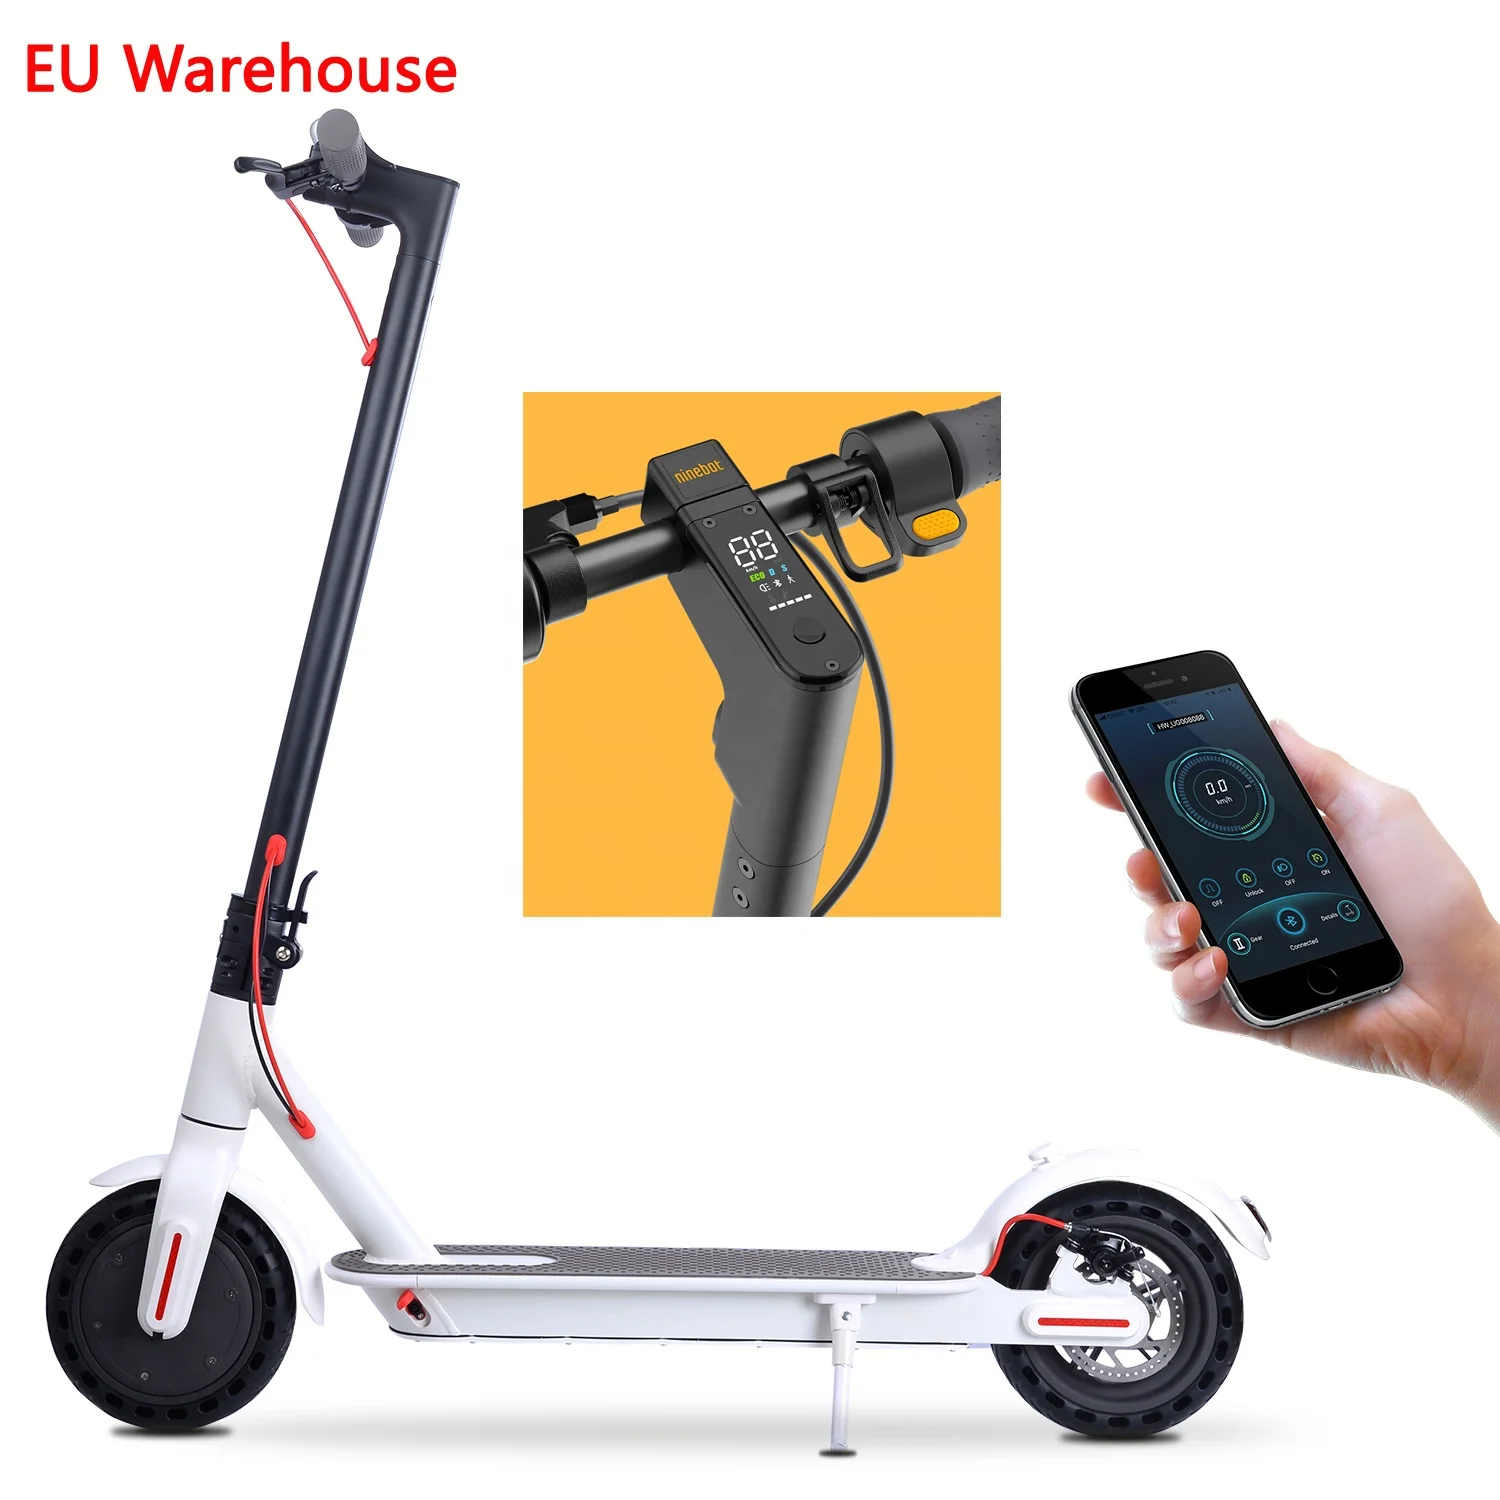 

Original kick e scooter 7.8AH Battery removable 8.5 inch 350w Motor 30KM Range m365Pro folding electric scooter adult from EU, Black white